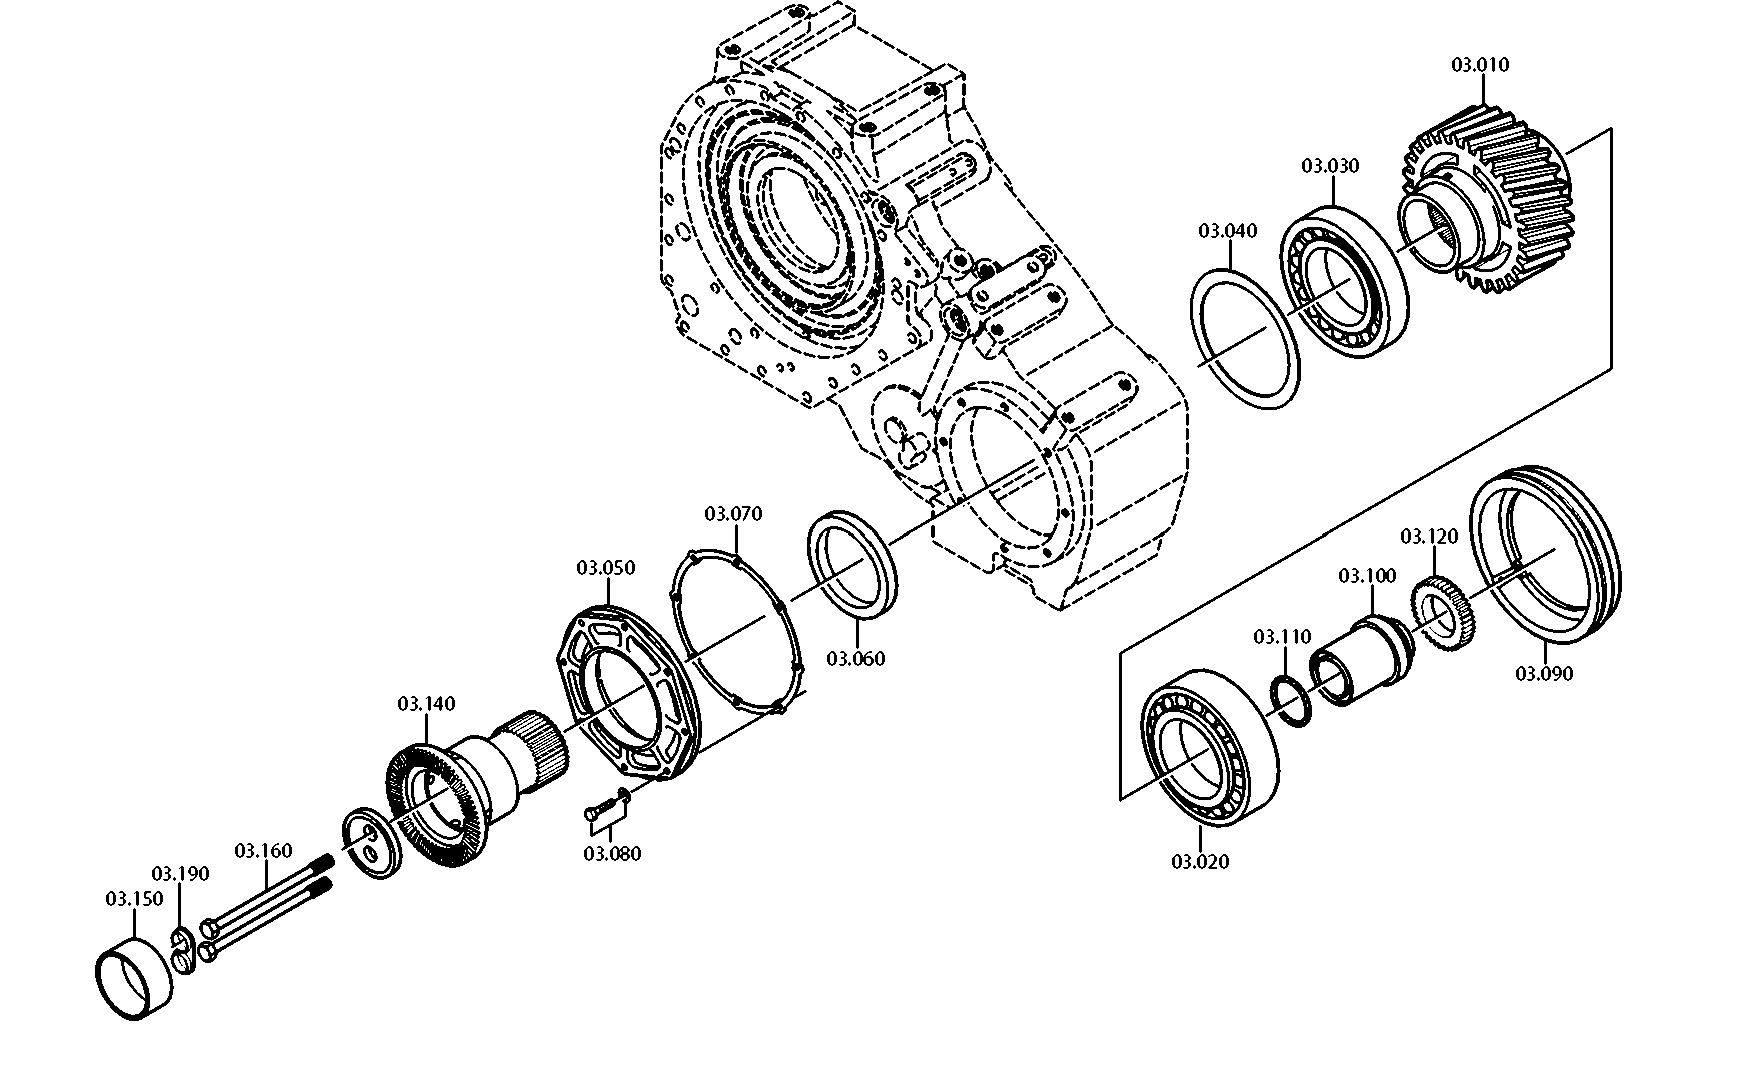 drawing for MOXY TRUCKS AS 352010 - SHAFT SEAL (figure 1)